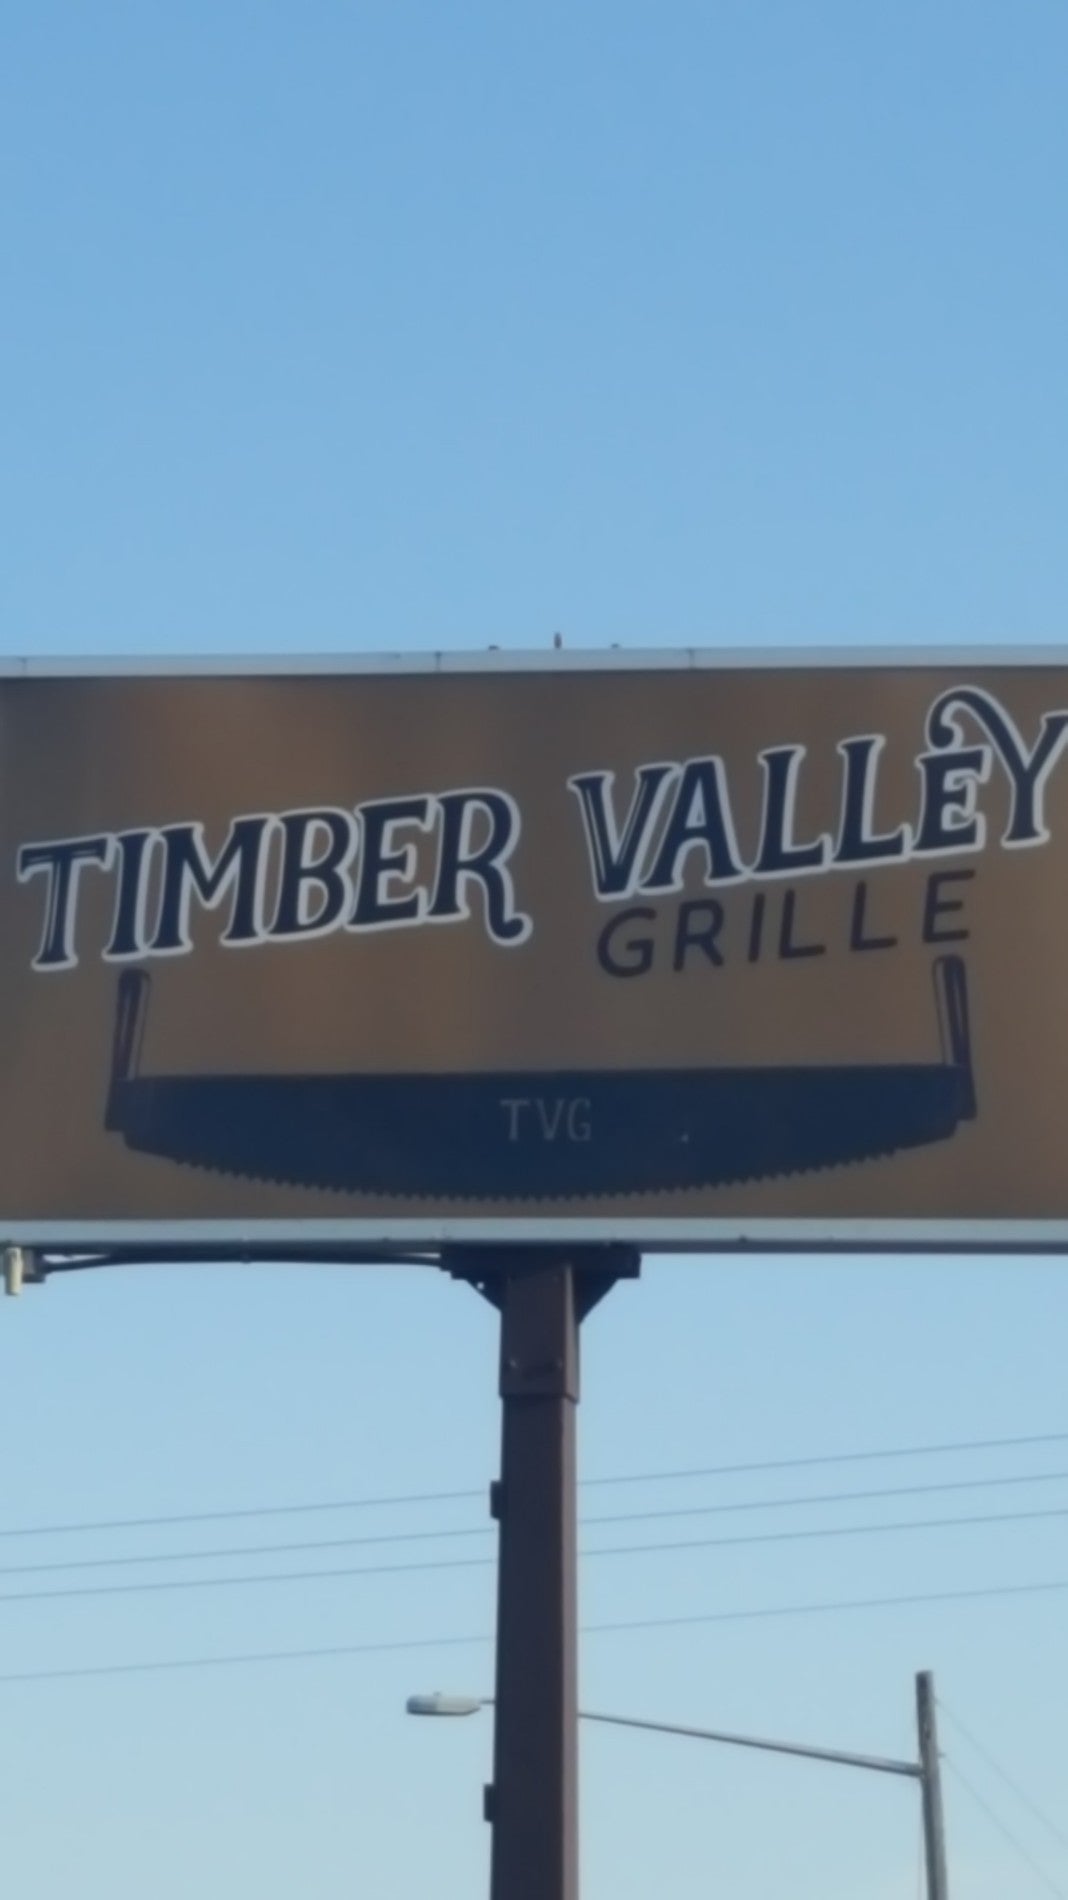 Timber Valley Grille, 1030 Central Ave N, Milaca, MN, Eating places ...